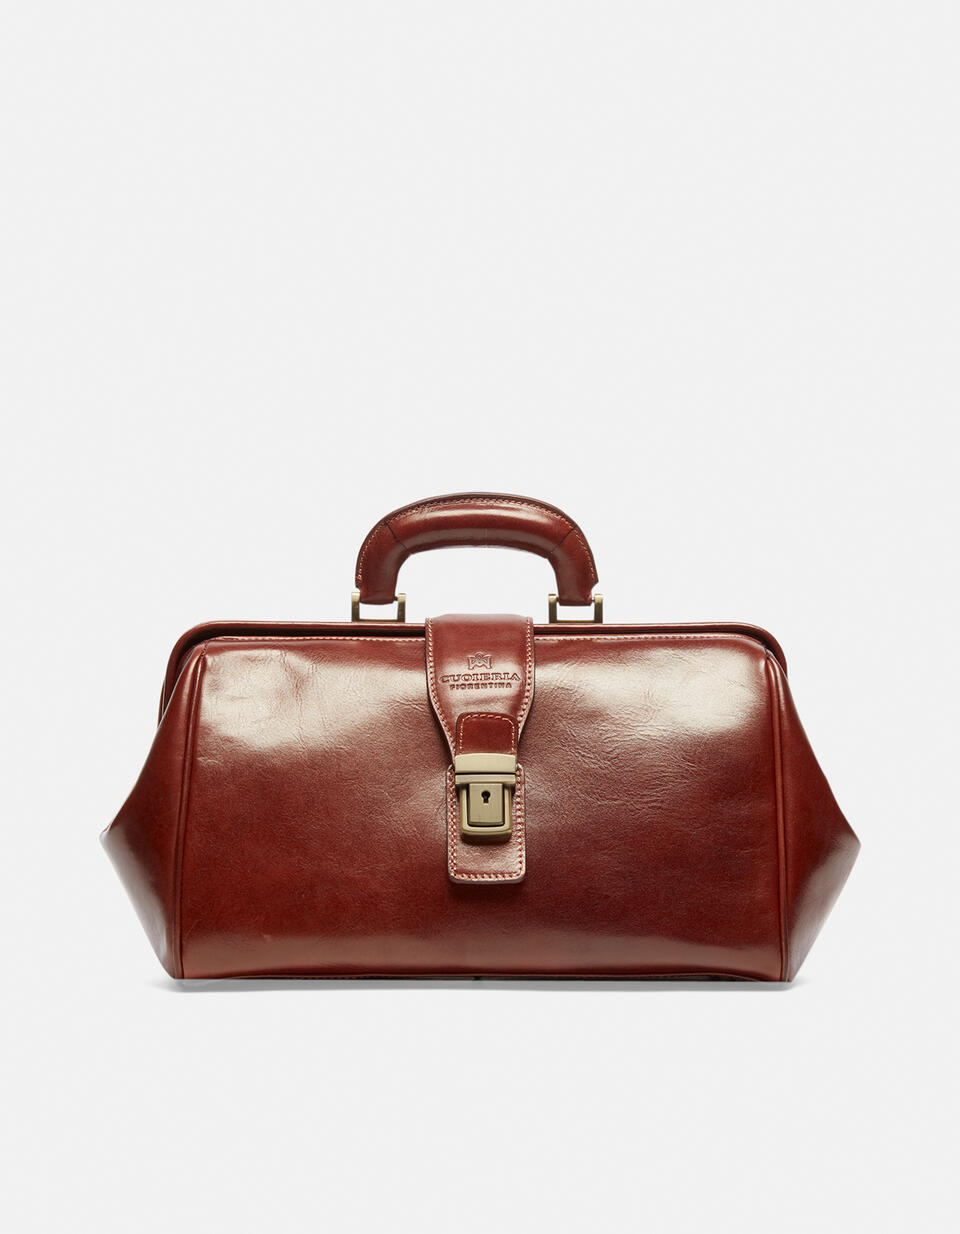 Small leather doctor's bag  - Doctor Bags - Briefcases - Cuoieria Fiorentina